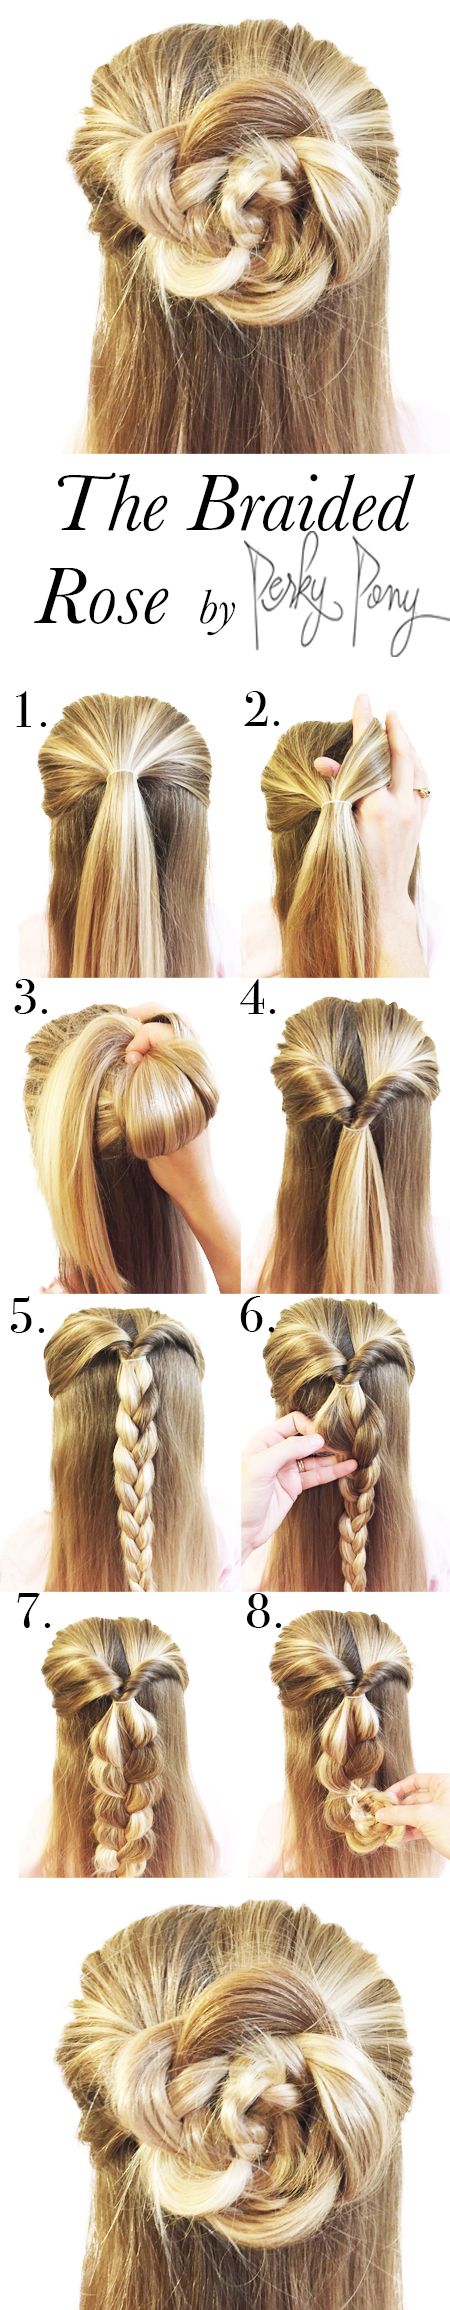 12 Simple and Easy Hairstyles for Your Daily Look